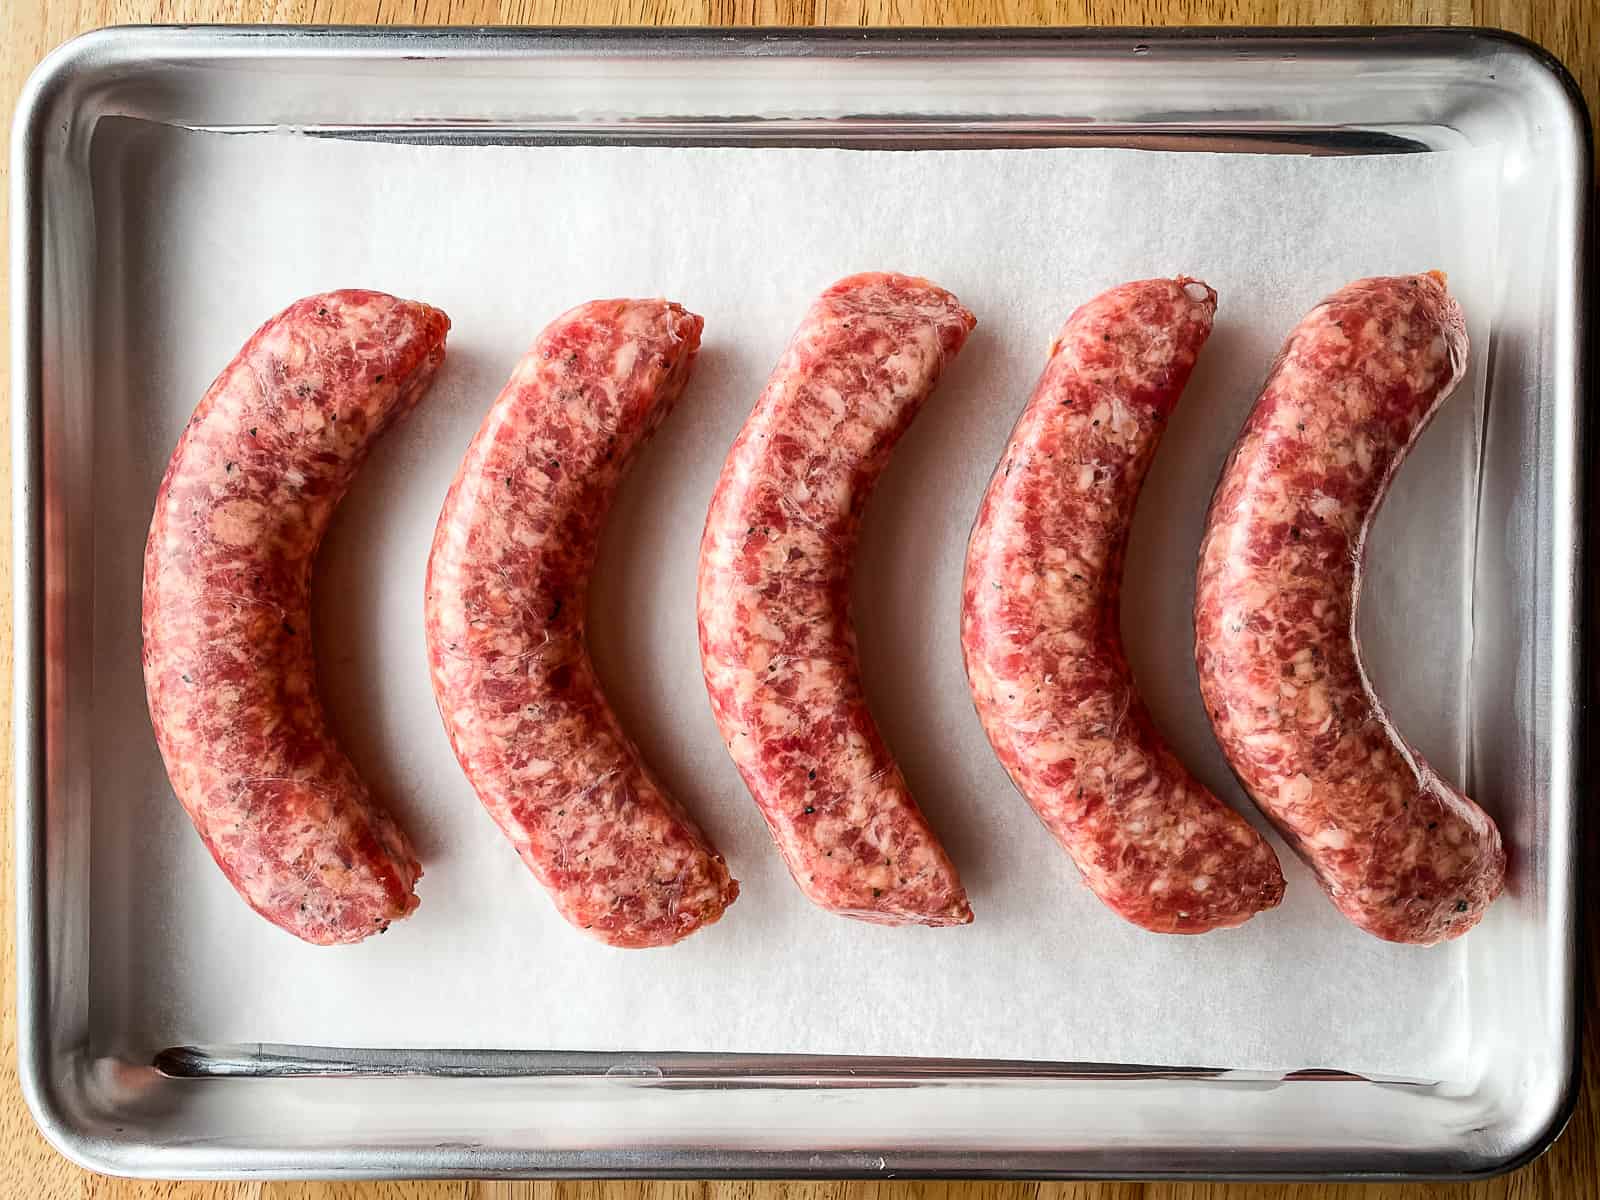 Five raw Italian sausage on a parchment lined baking sheet.